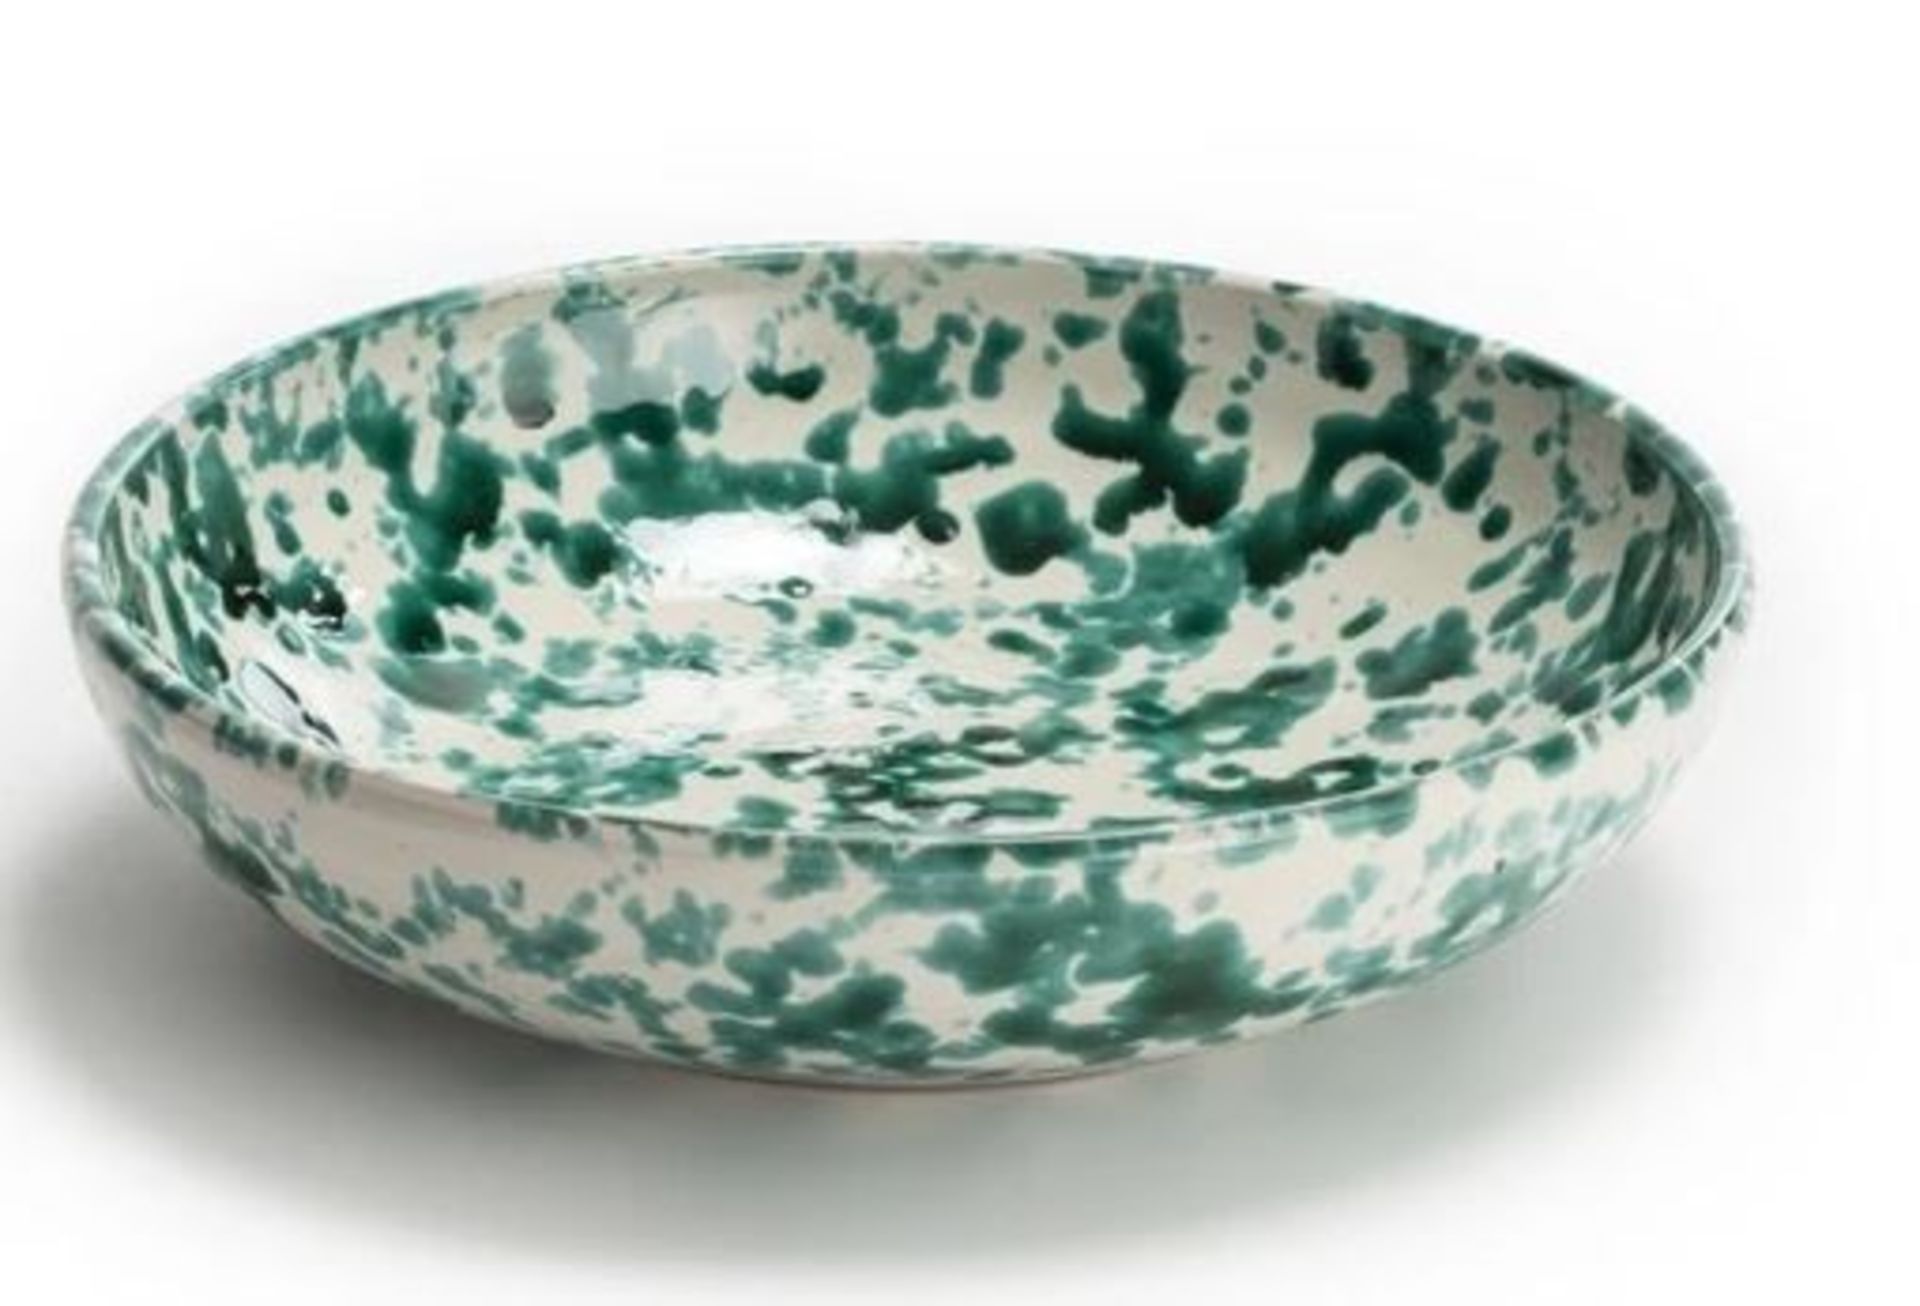 1 X LA REDOUTE ARIANA SPECKLED BOWL IN GREEN 25CM / RRP £35.00 / GRADE A